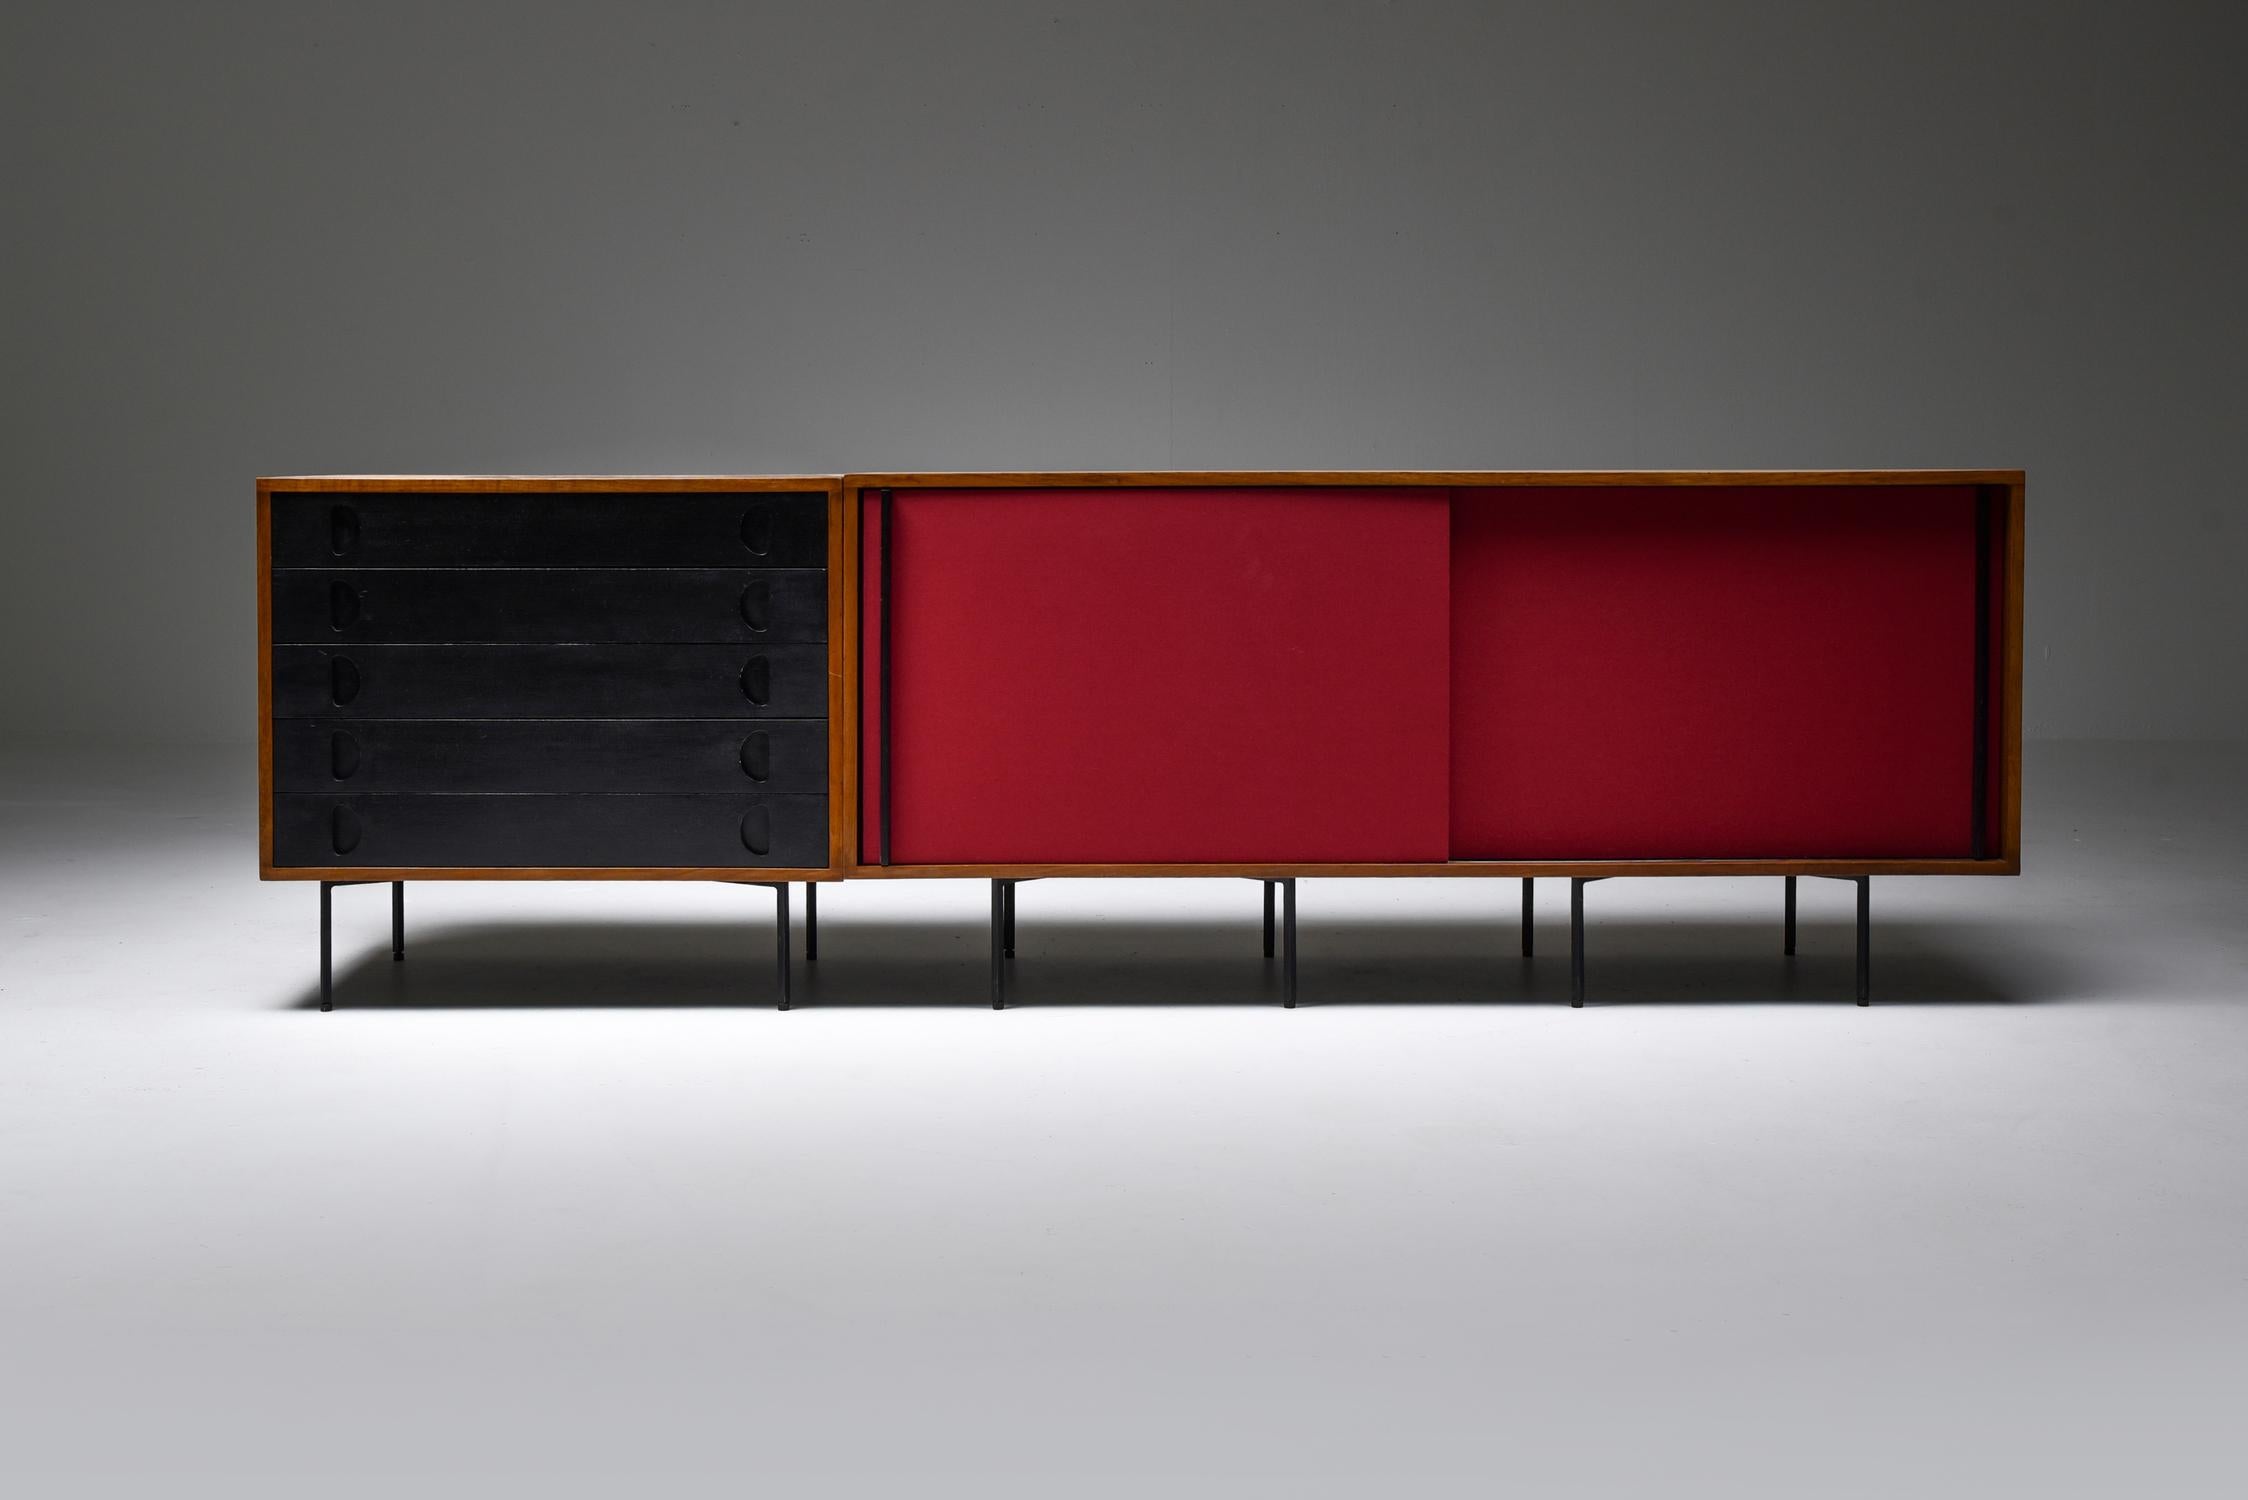 Sideboard with drawers and sliding doors, in teak on metal legs, Franco Campo and Carlo Graffi, Italy, 1950s.

Credenza on pin legs consiting of two units; one with five black lacquer drawers and one with two burgundy red fabric sliding doors by